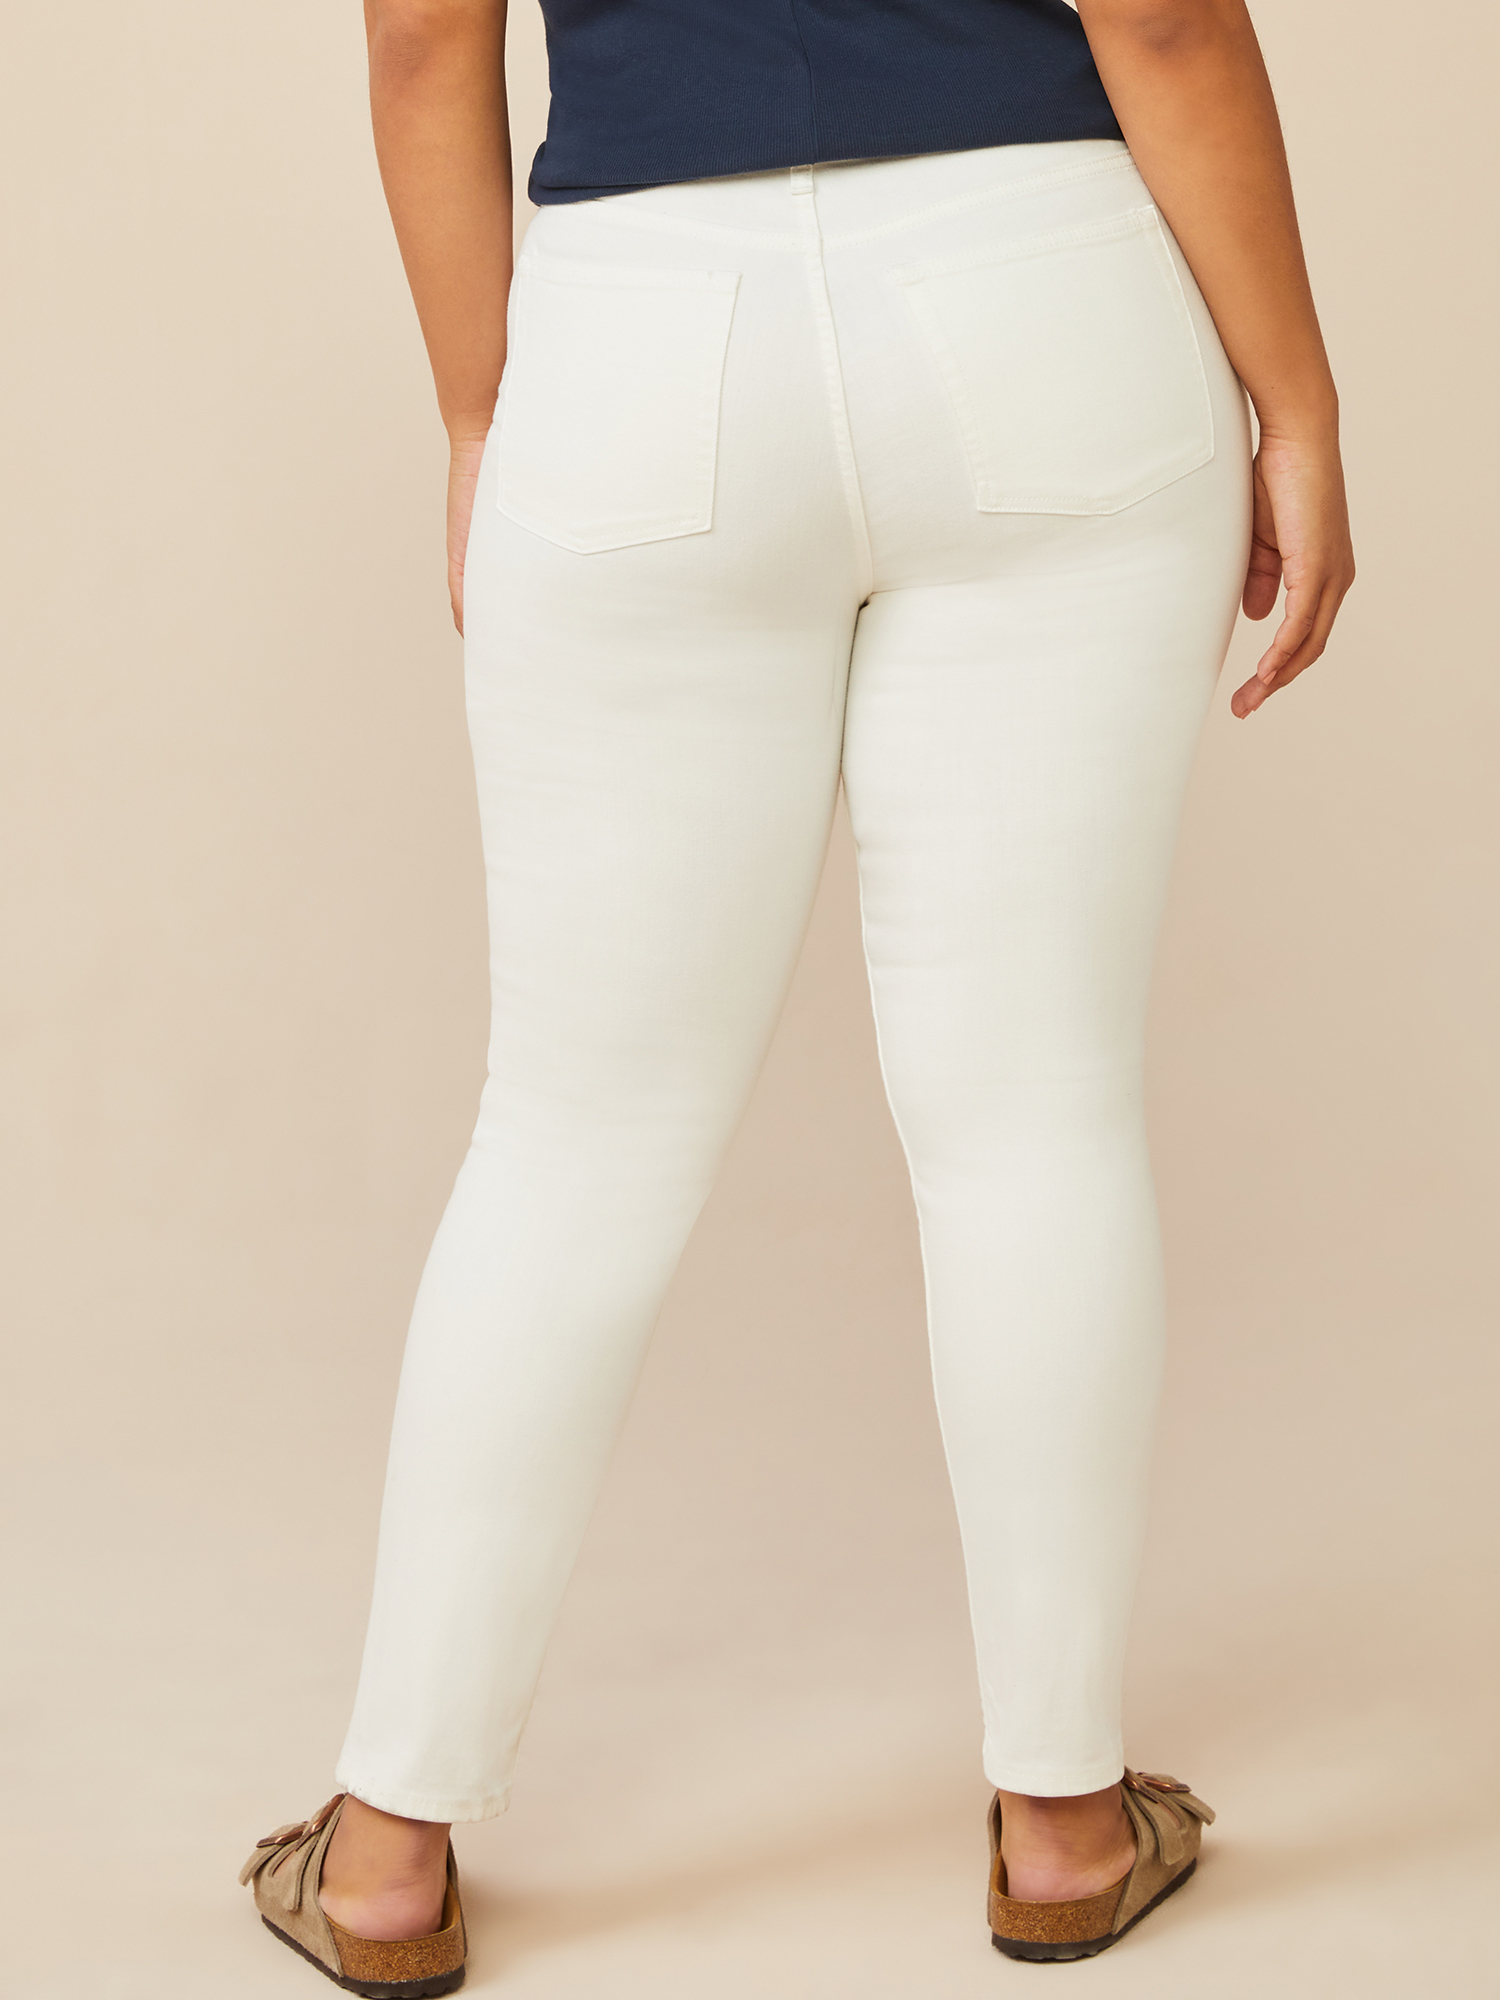 Free Assembly Women's High Rise Skinny Jeans - image 5 of 5